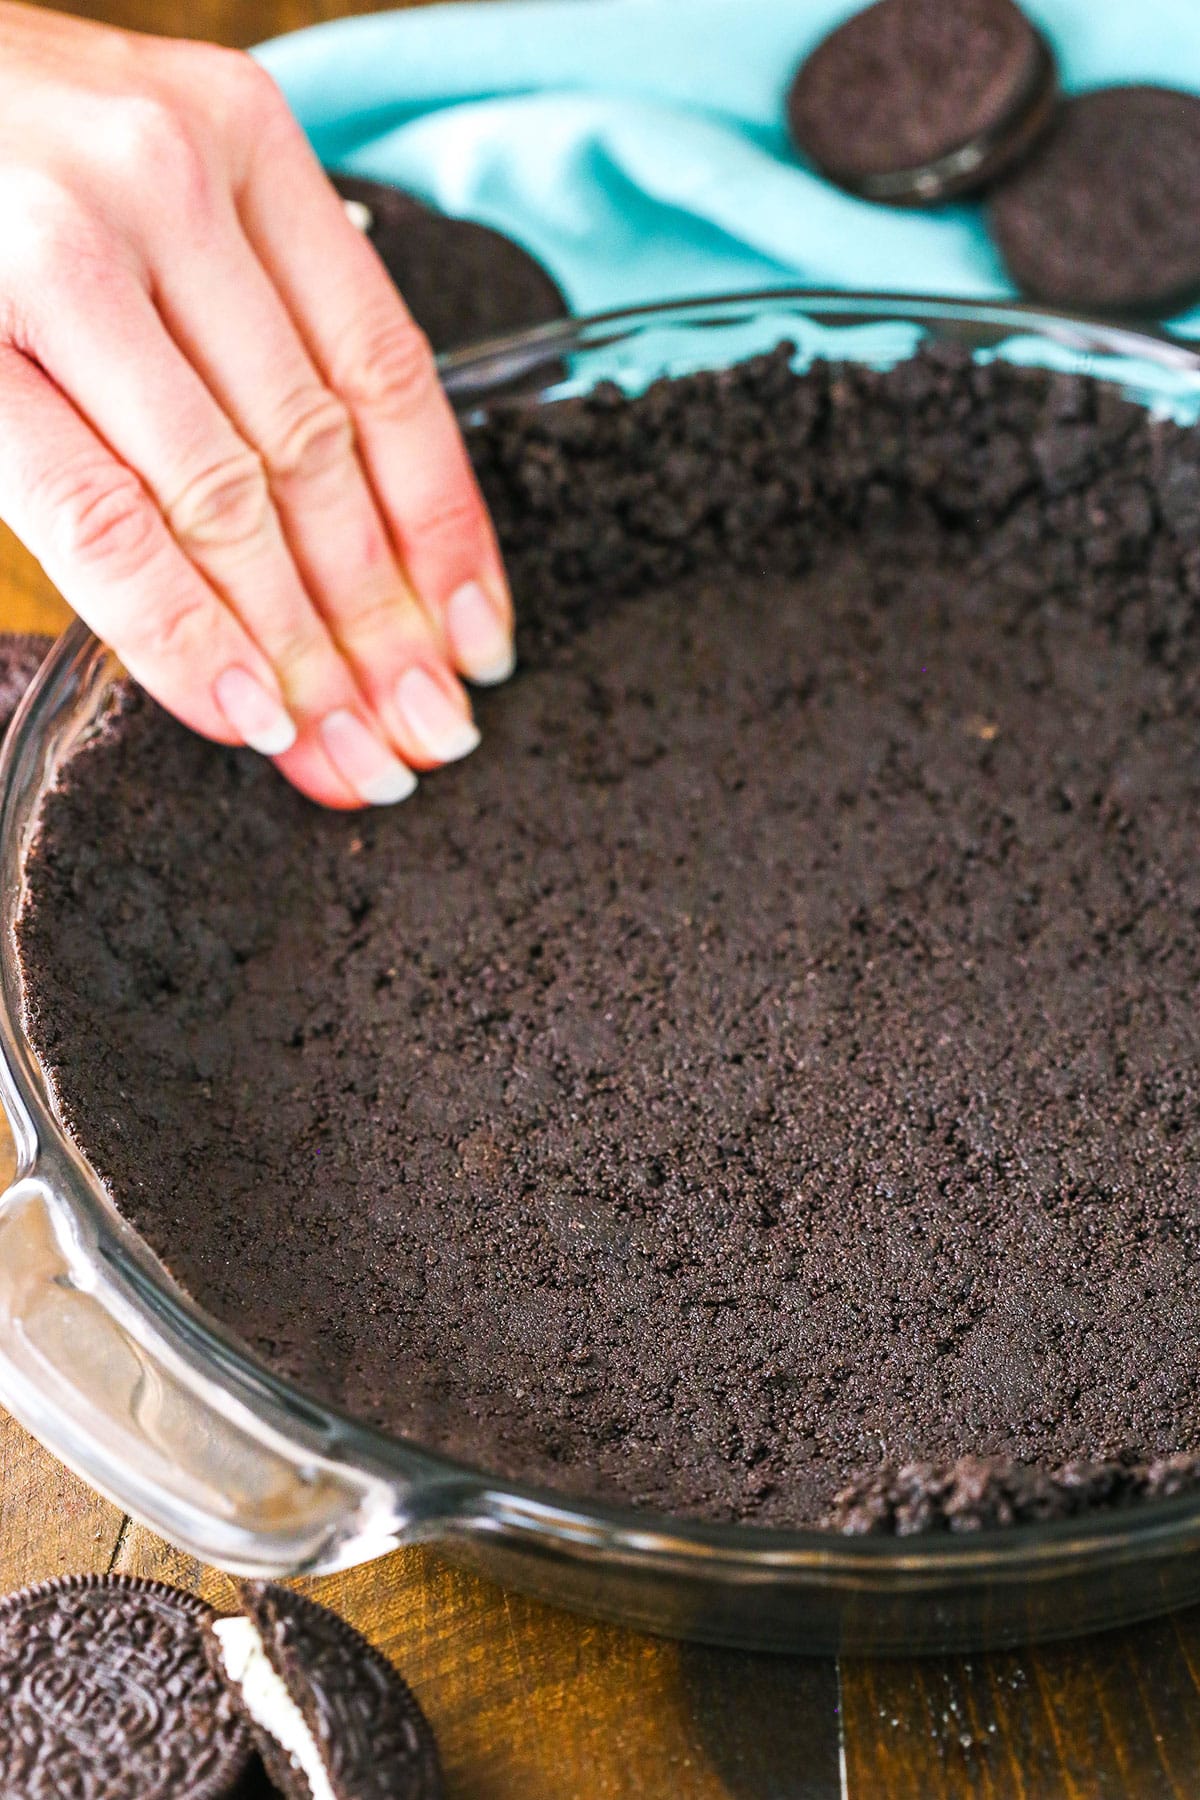 Oreo Cookie Crust being pressed into a clear glass pan